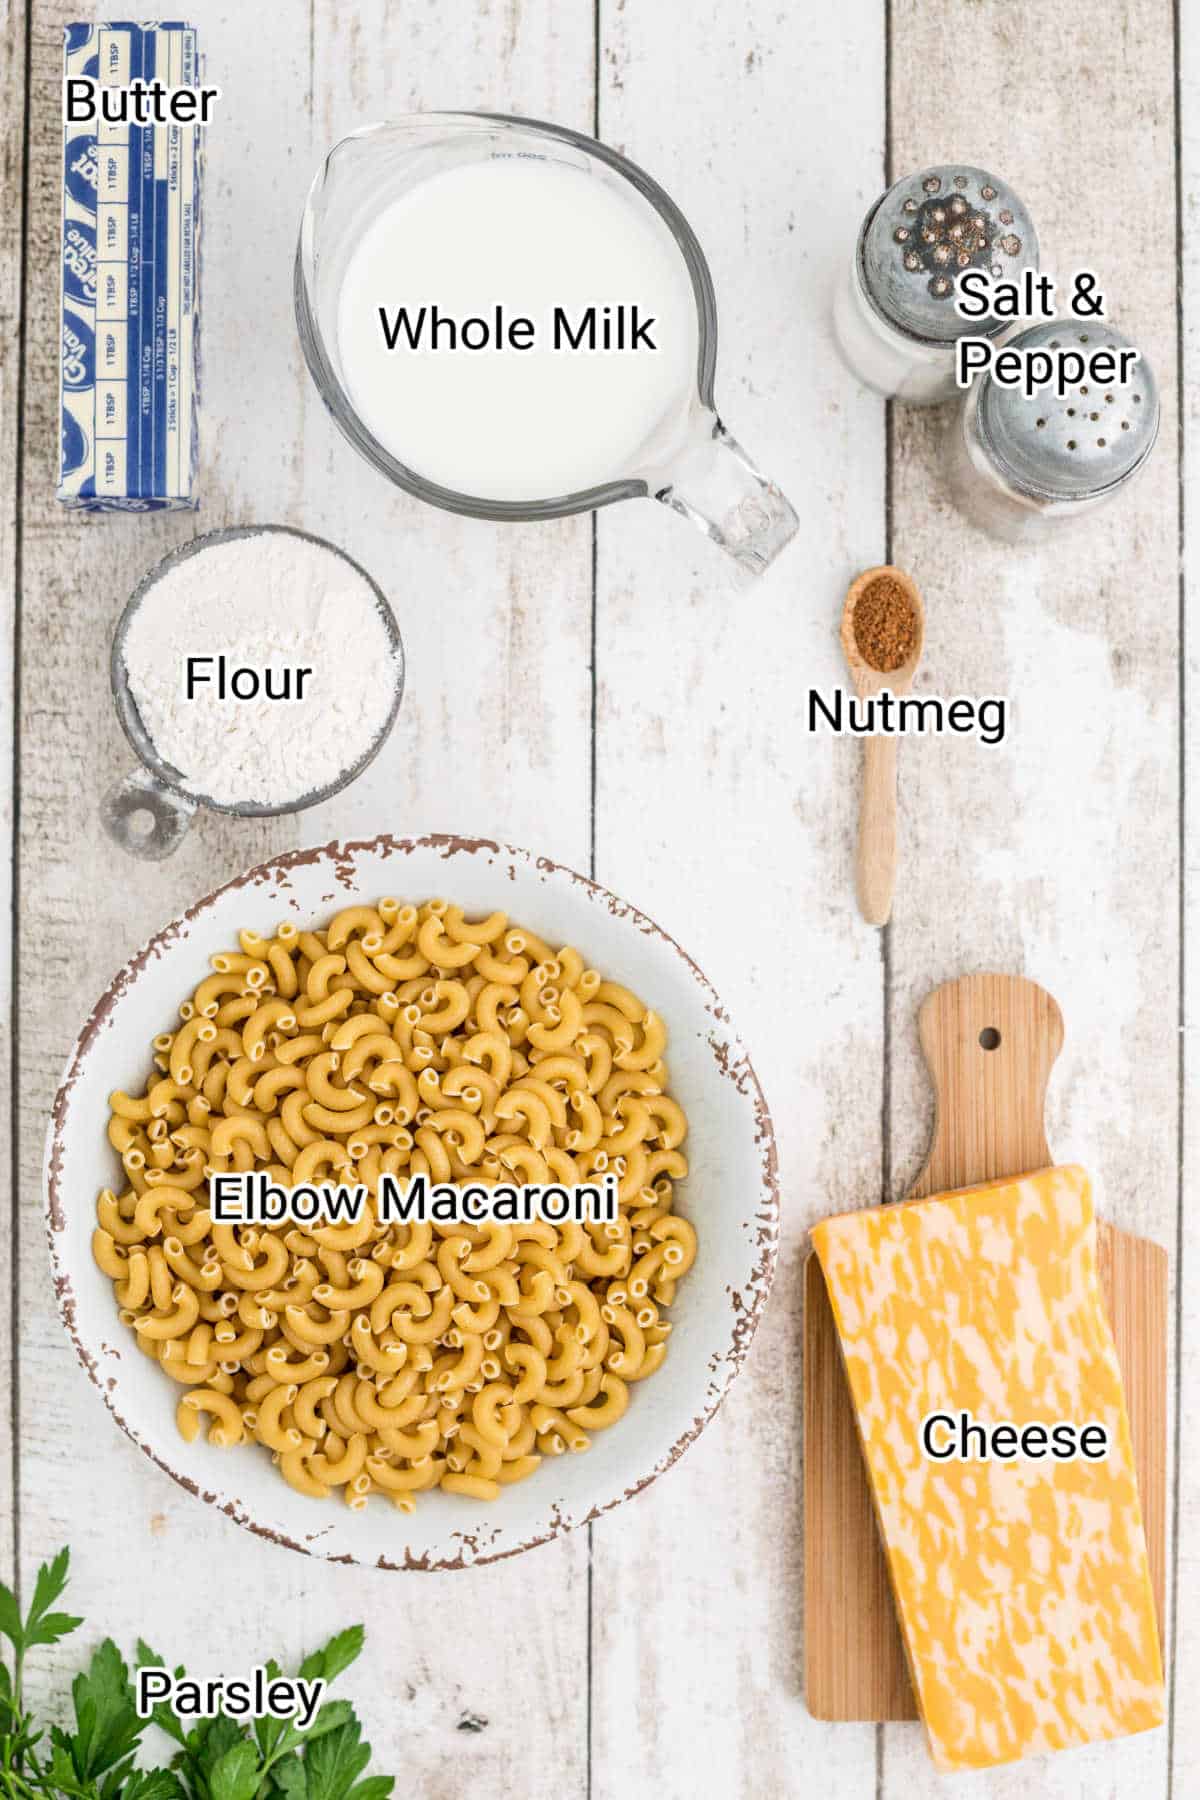 ingredients all laid out what is needed to make a cracker barrel mac and cheese recipe.